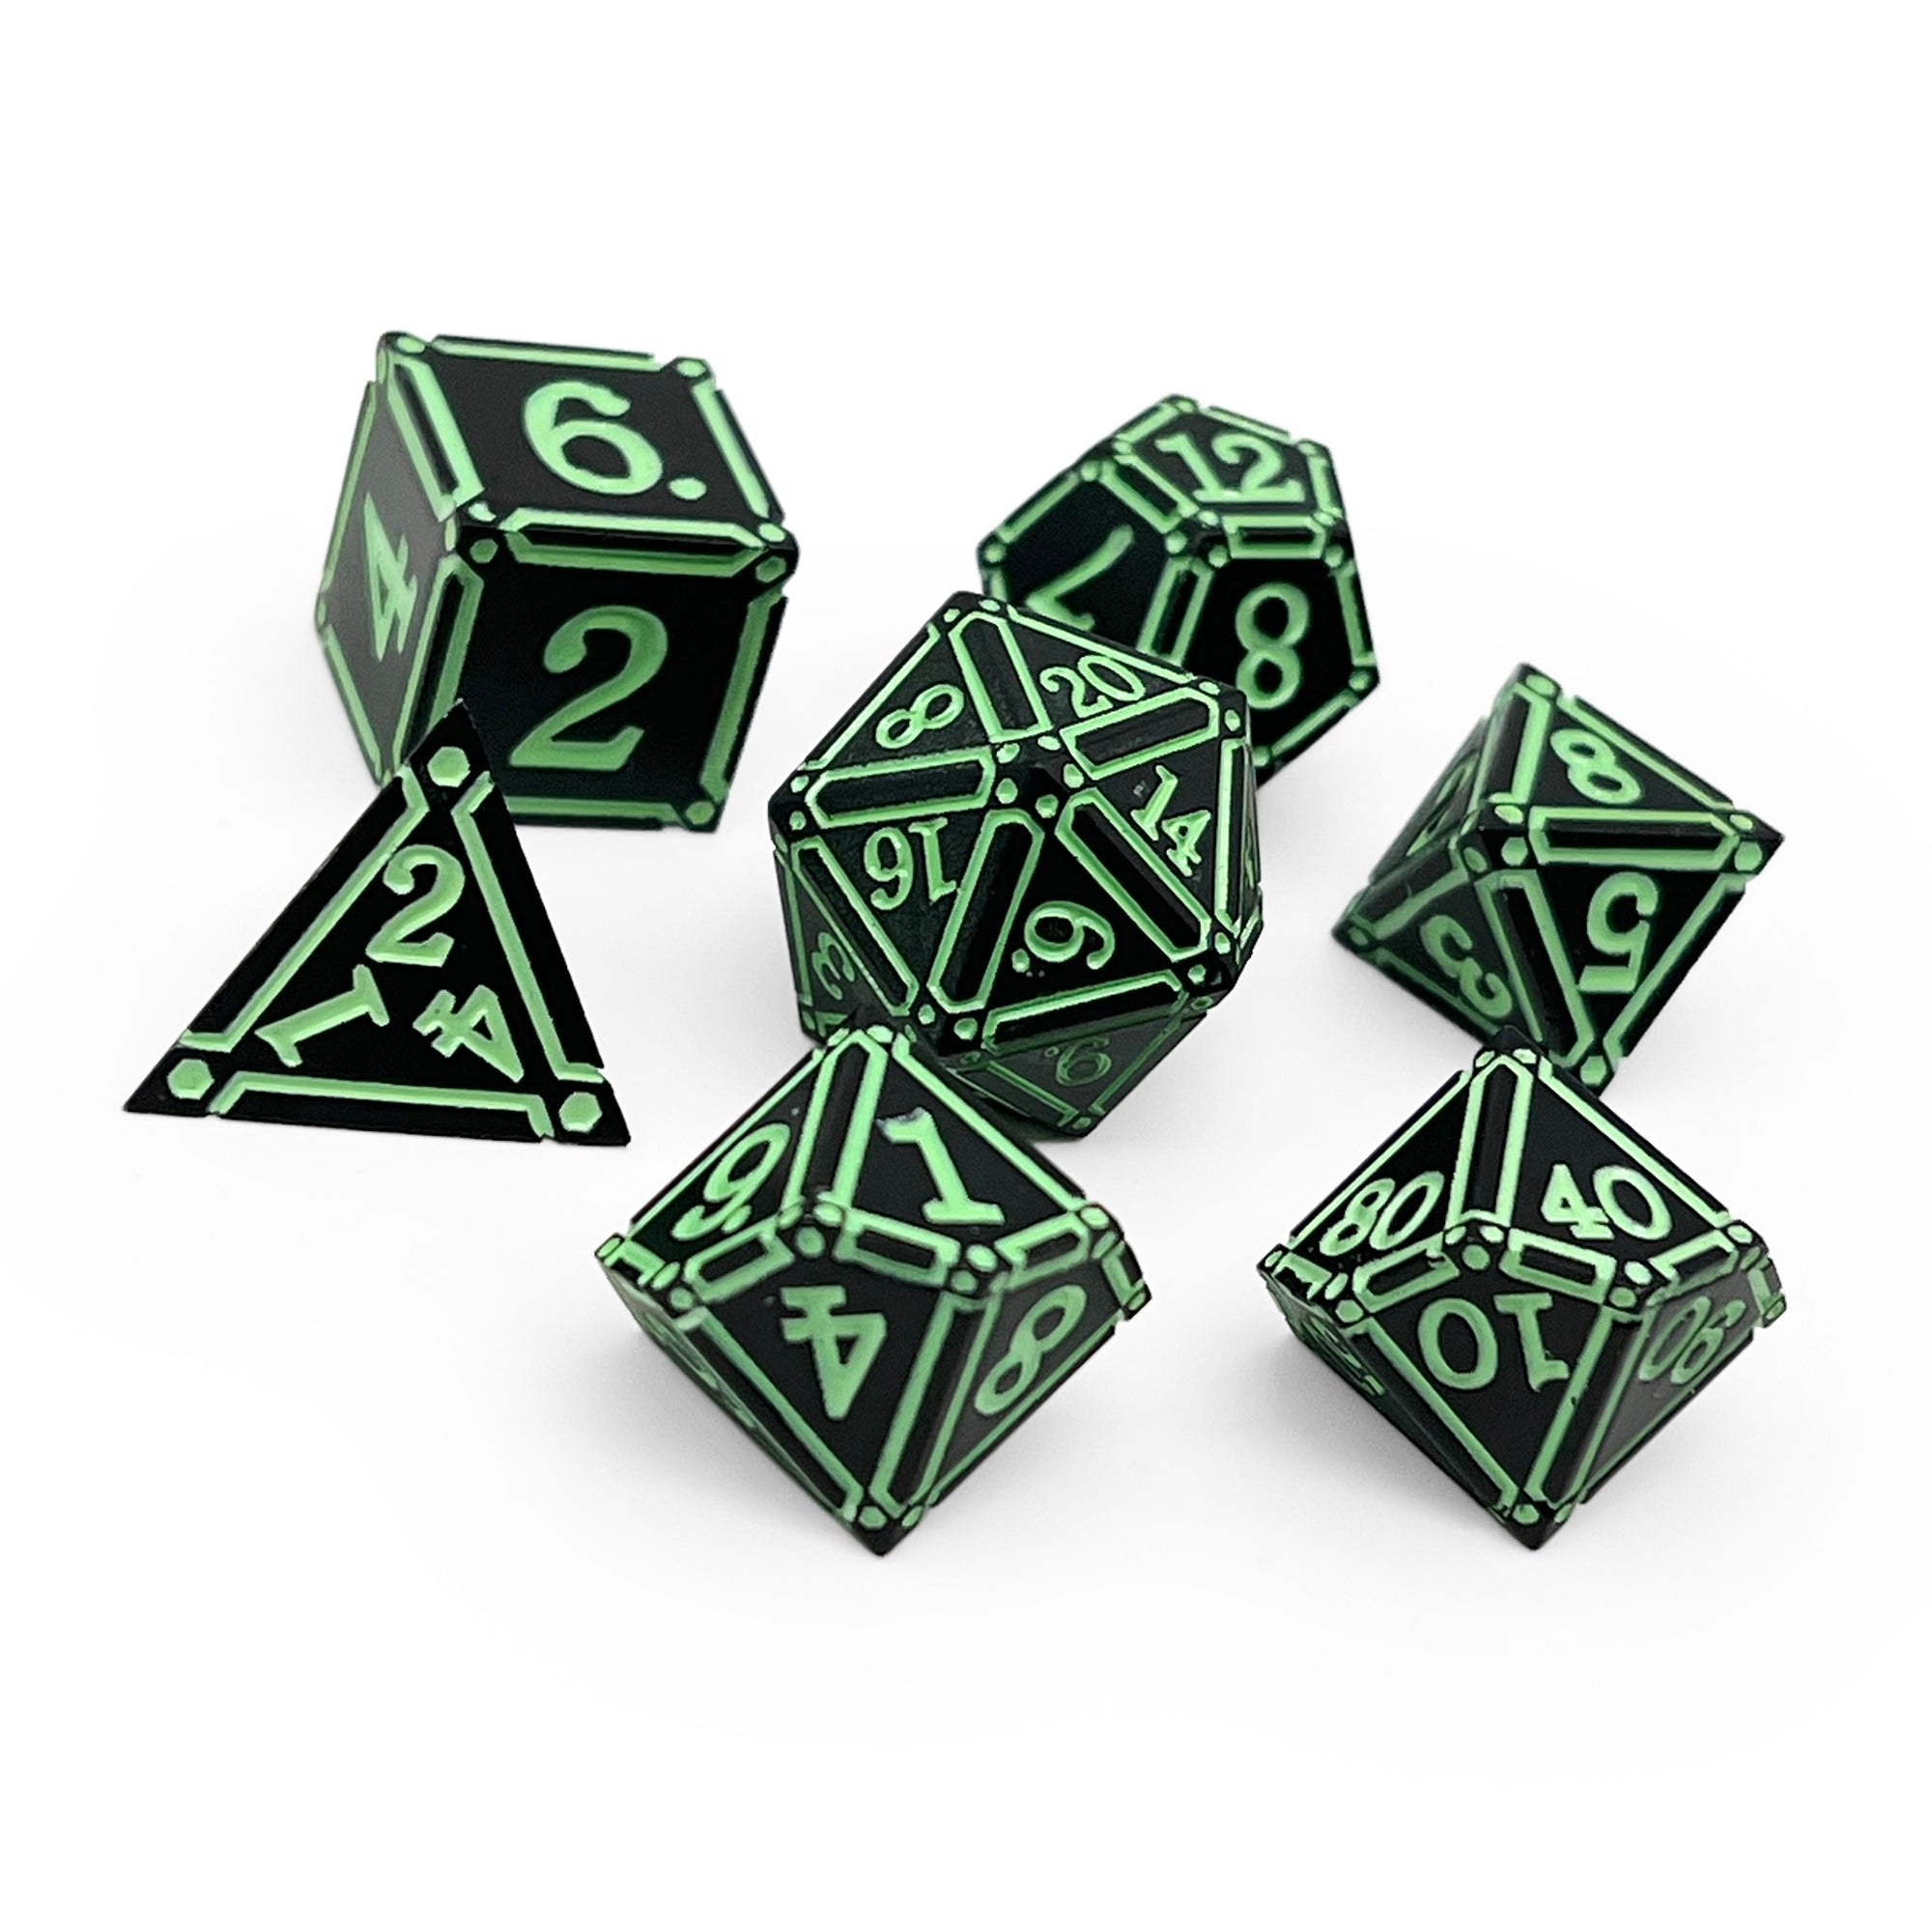 Ironworks - Witches Heart 7 Piece RPG set Alloy Dice